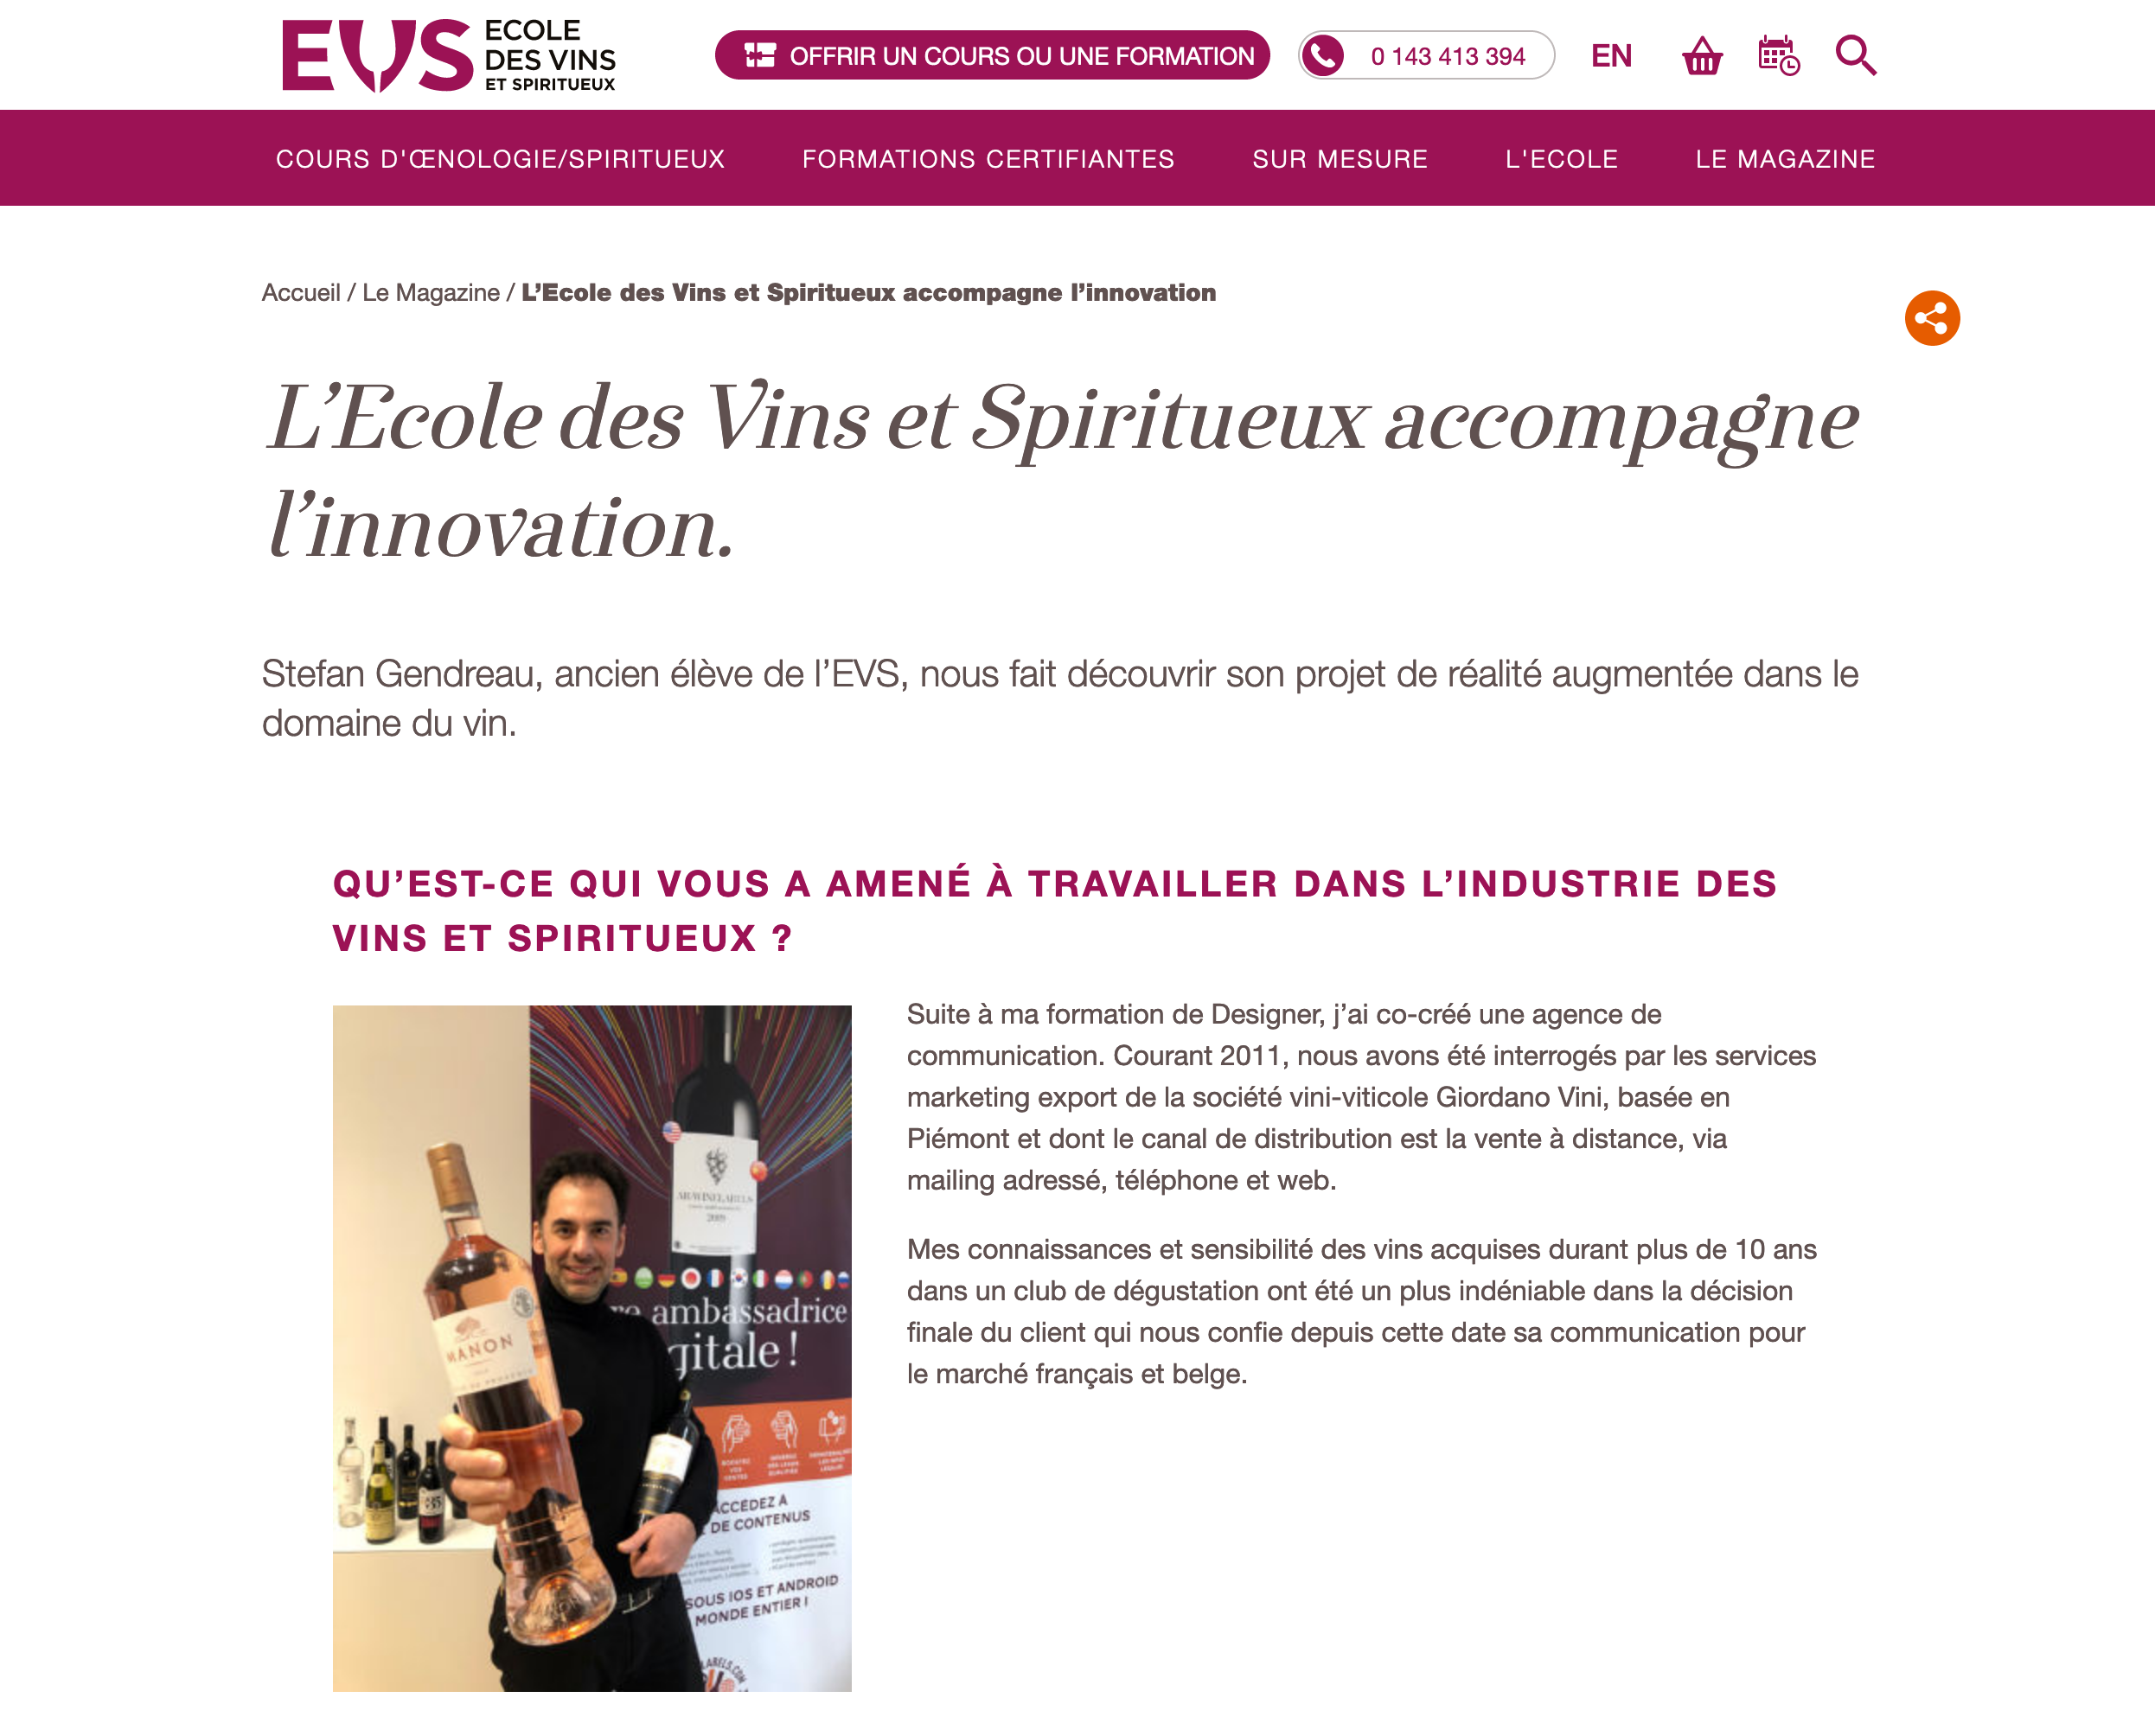 The Wine and Spirits School of Olivier Thiénot talks about us!